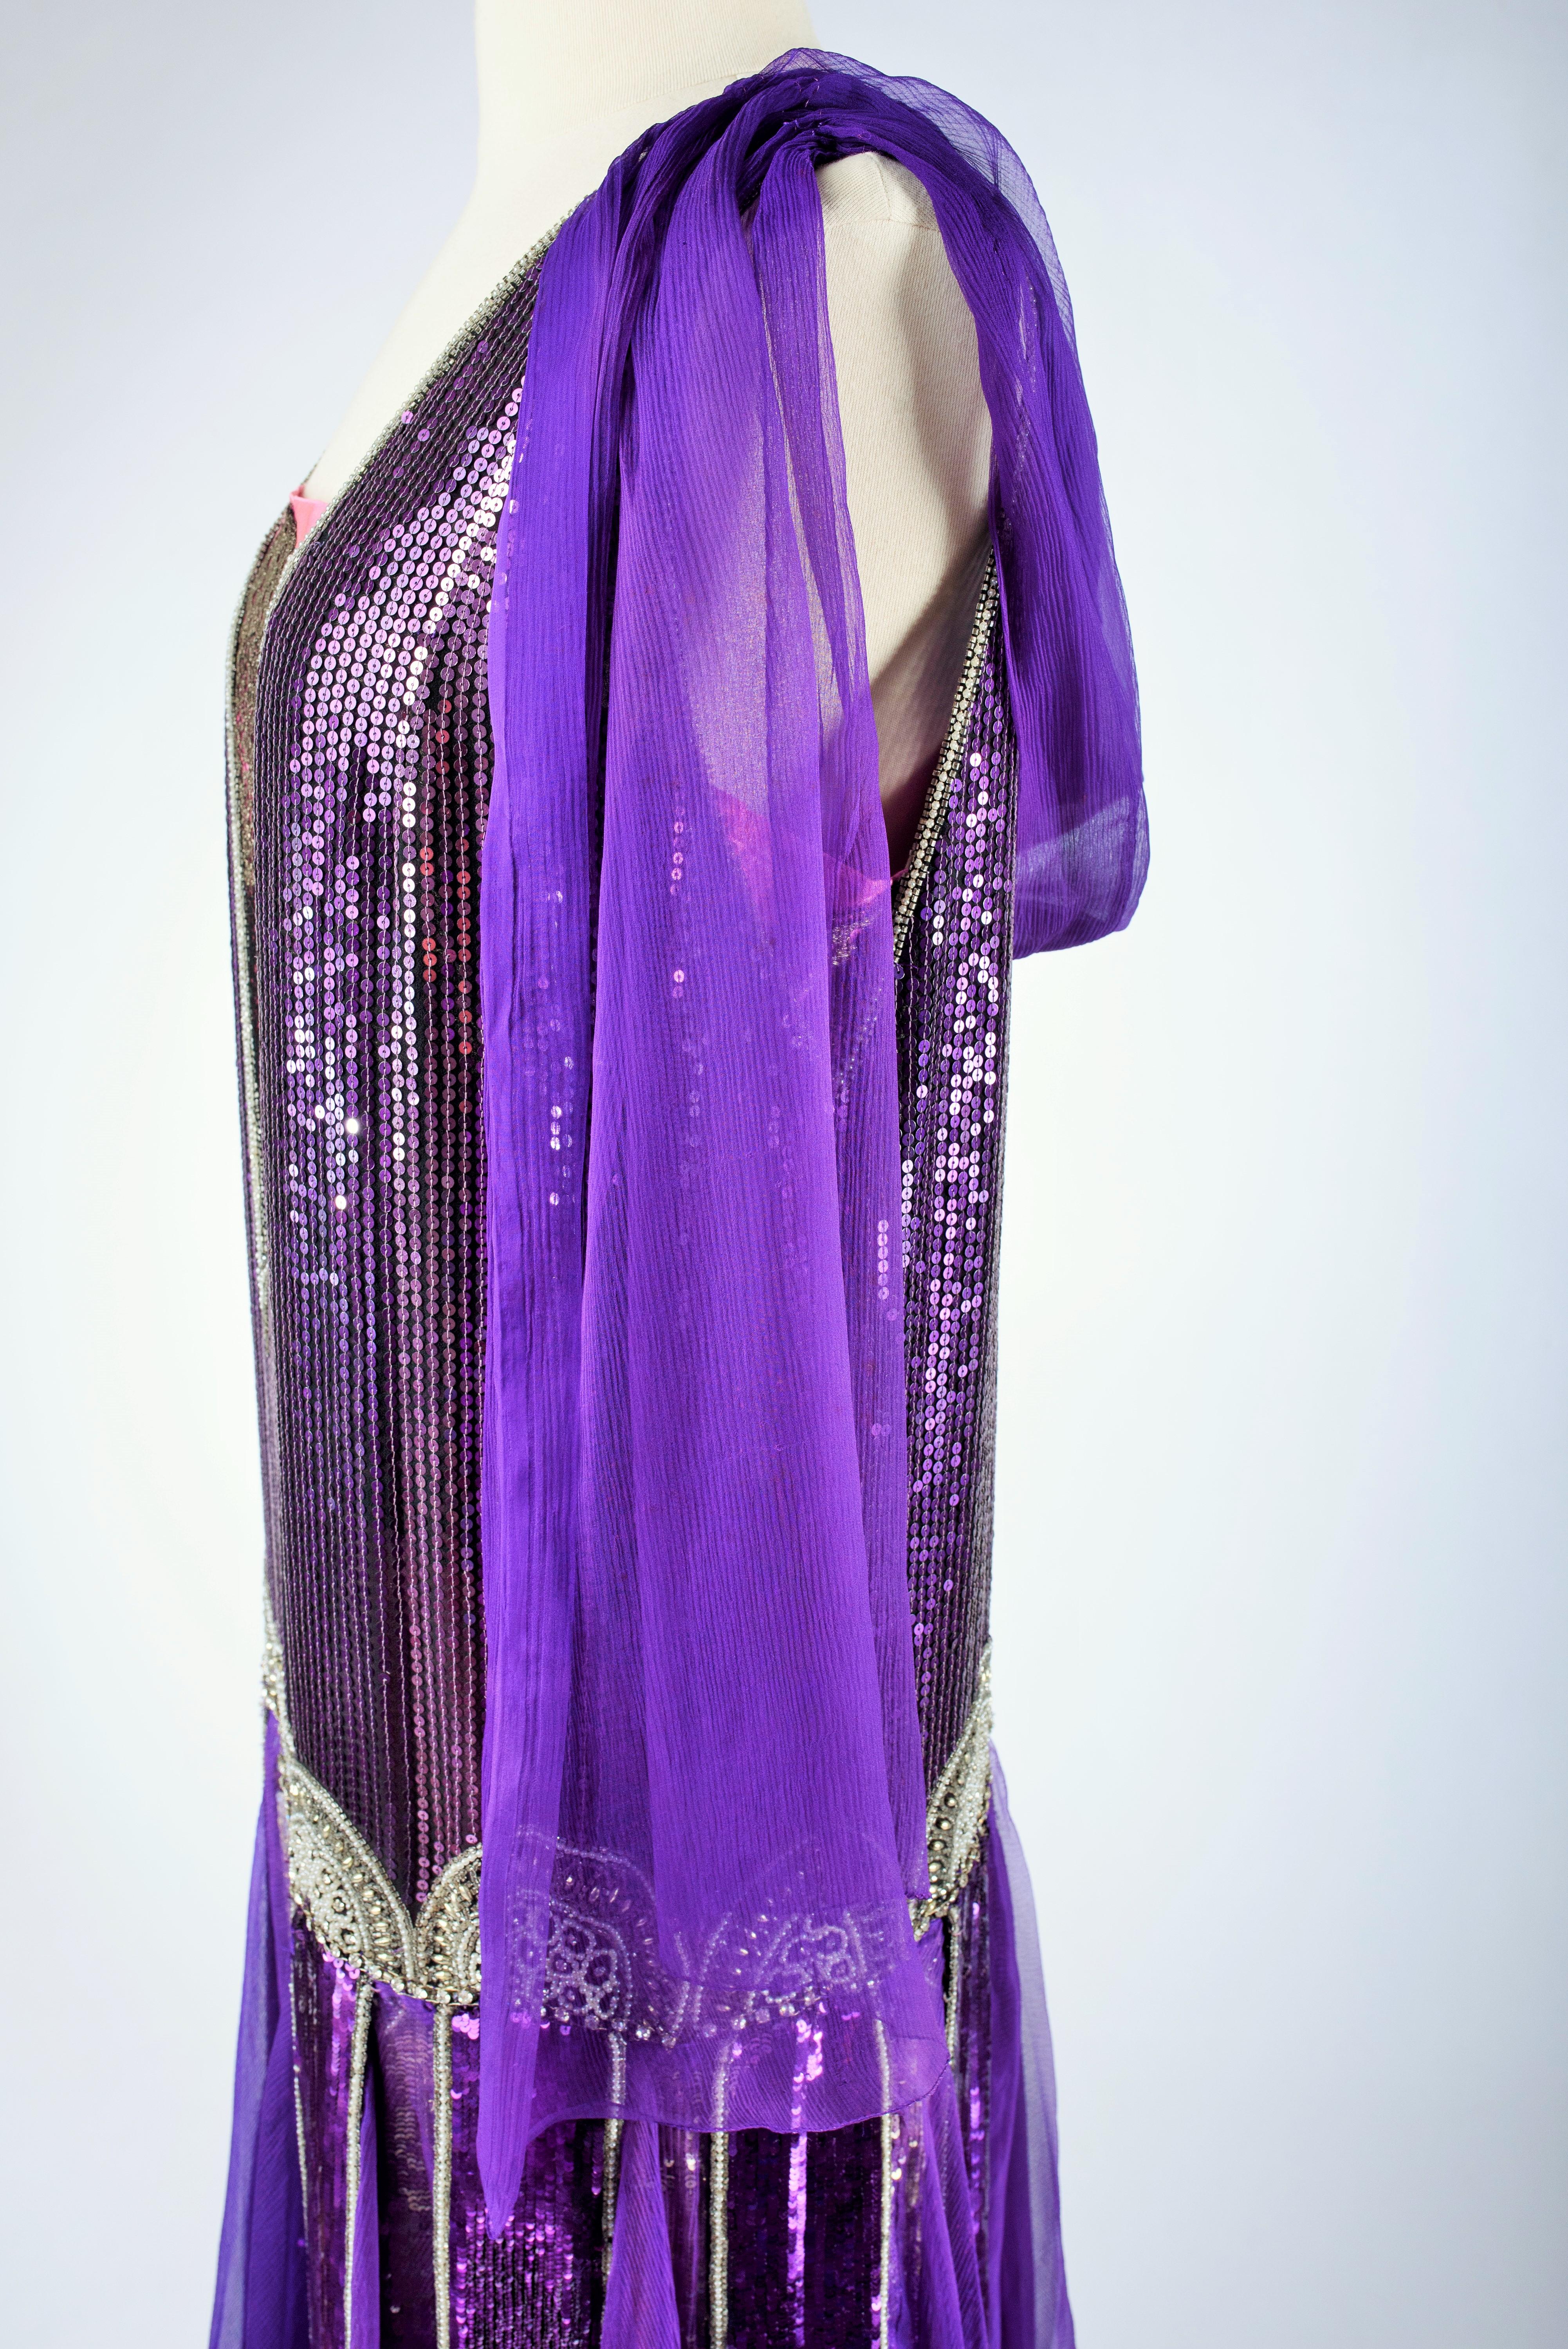 A Paul Poiret Ball Gown in Sequined Silk Crepe and Satin - France Circa 1925 For Sale 2